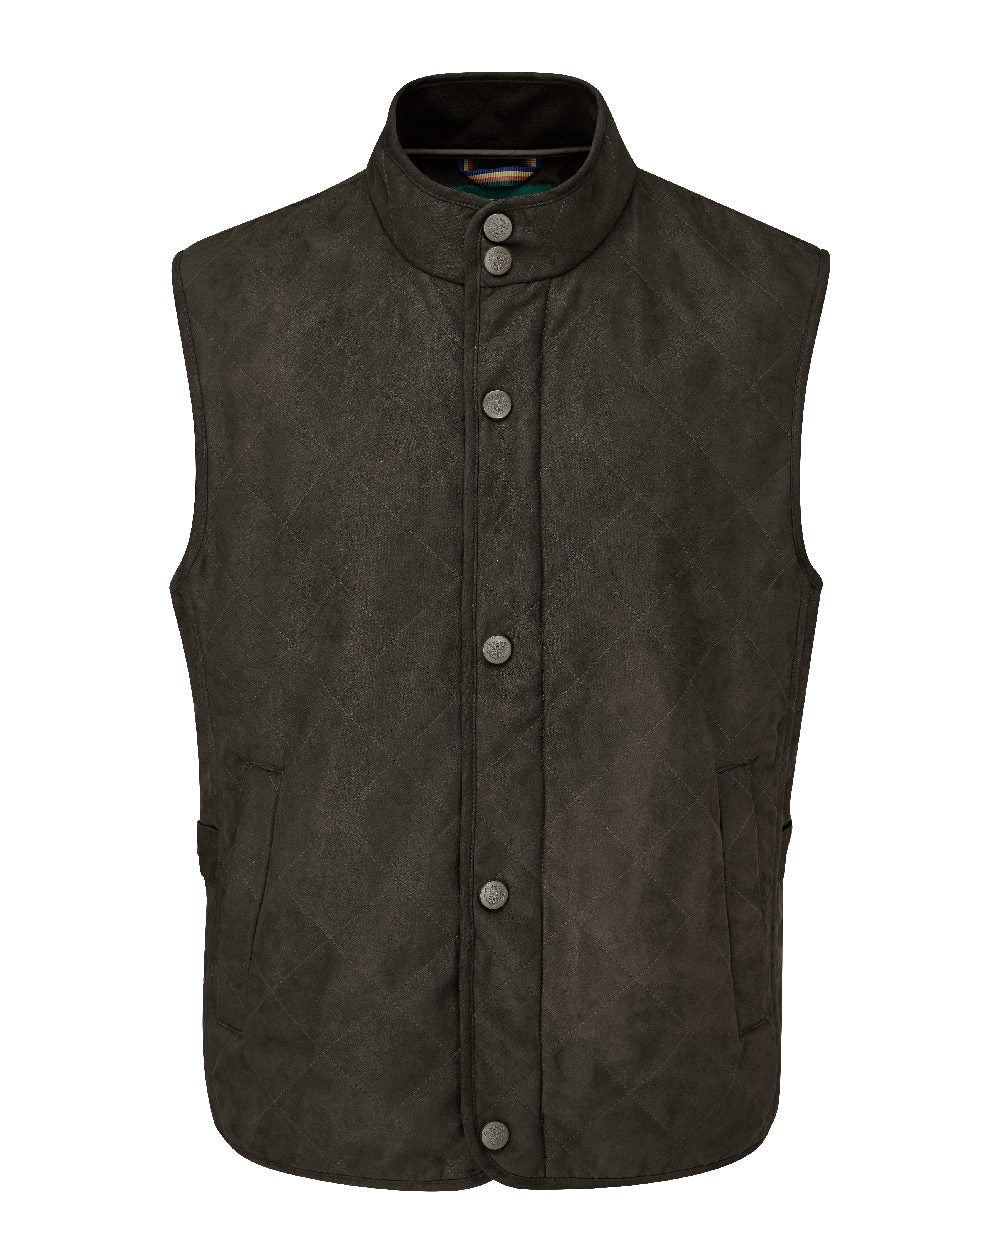 Alan Paine Felwell Mens Gilet in Olive 